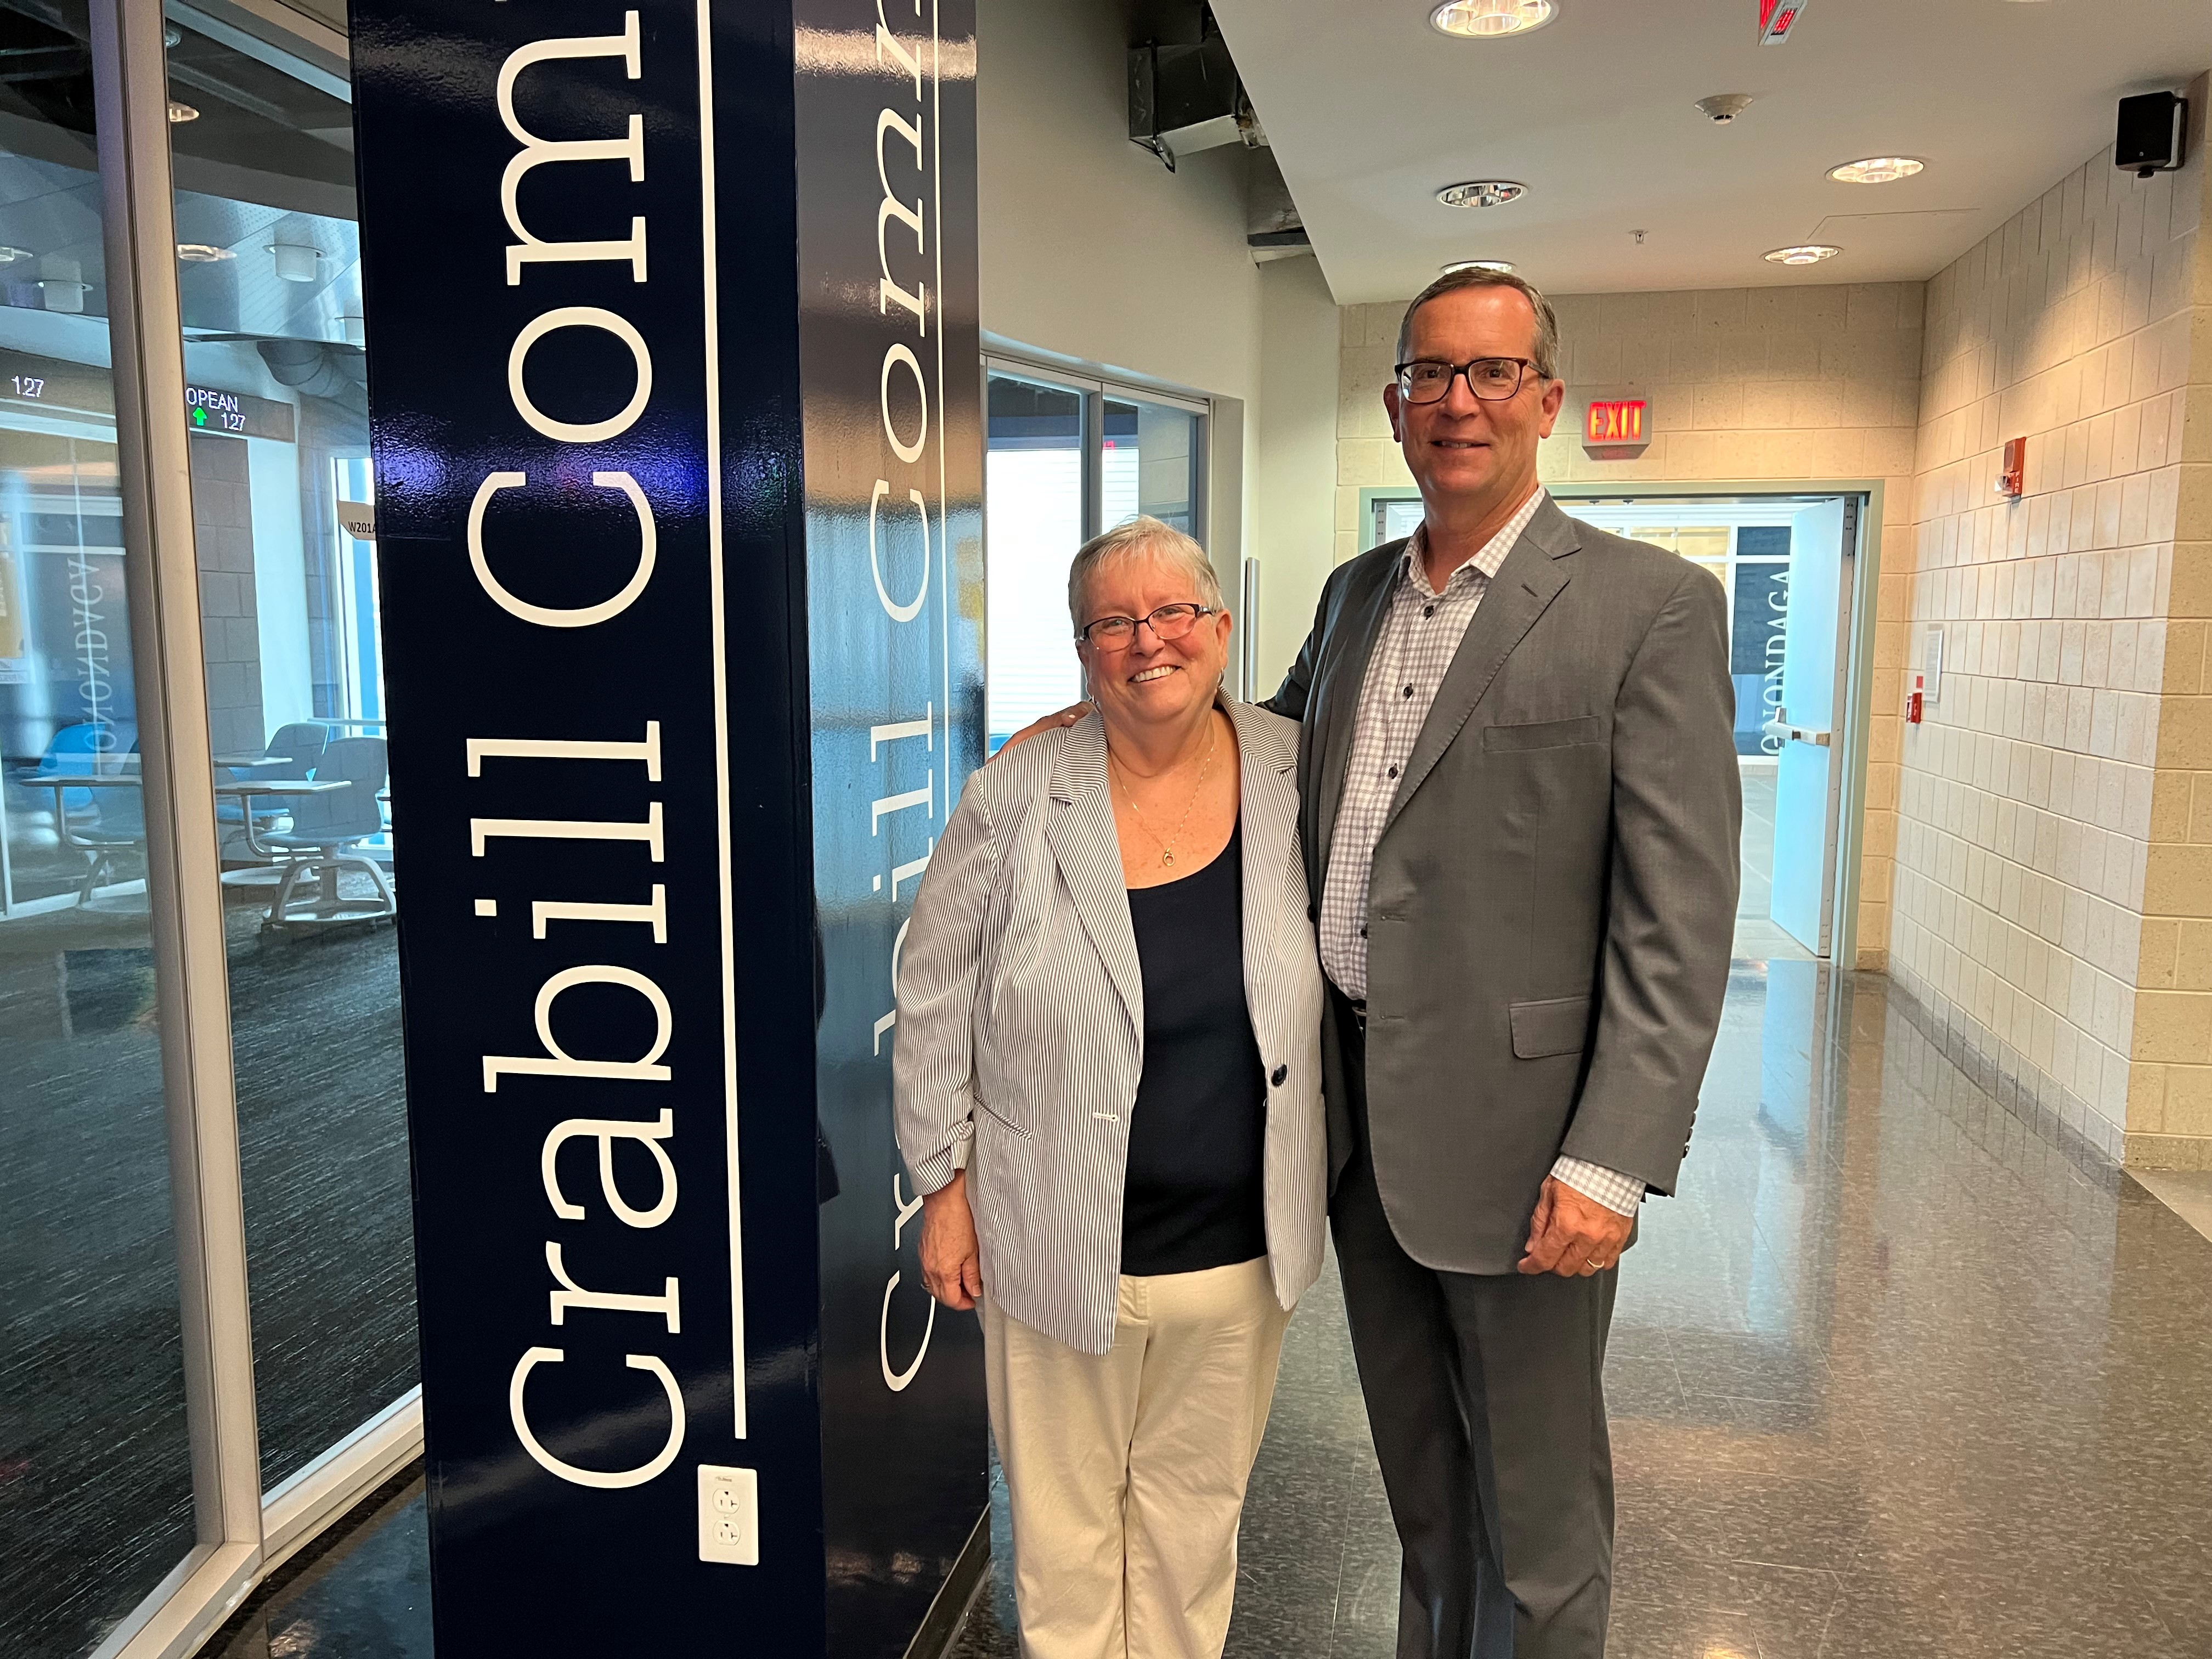 Retiring OCC President Dr. Casey Crabill (left) is pictured with Mark Tryniski '81 (right) of OCC's Board of Trustees. Whitney Commons was renamed "Crabill Commons" thanks to a $100,000 gift from Community Bank.